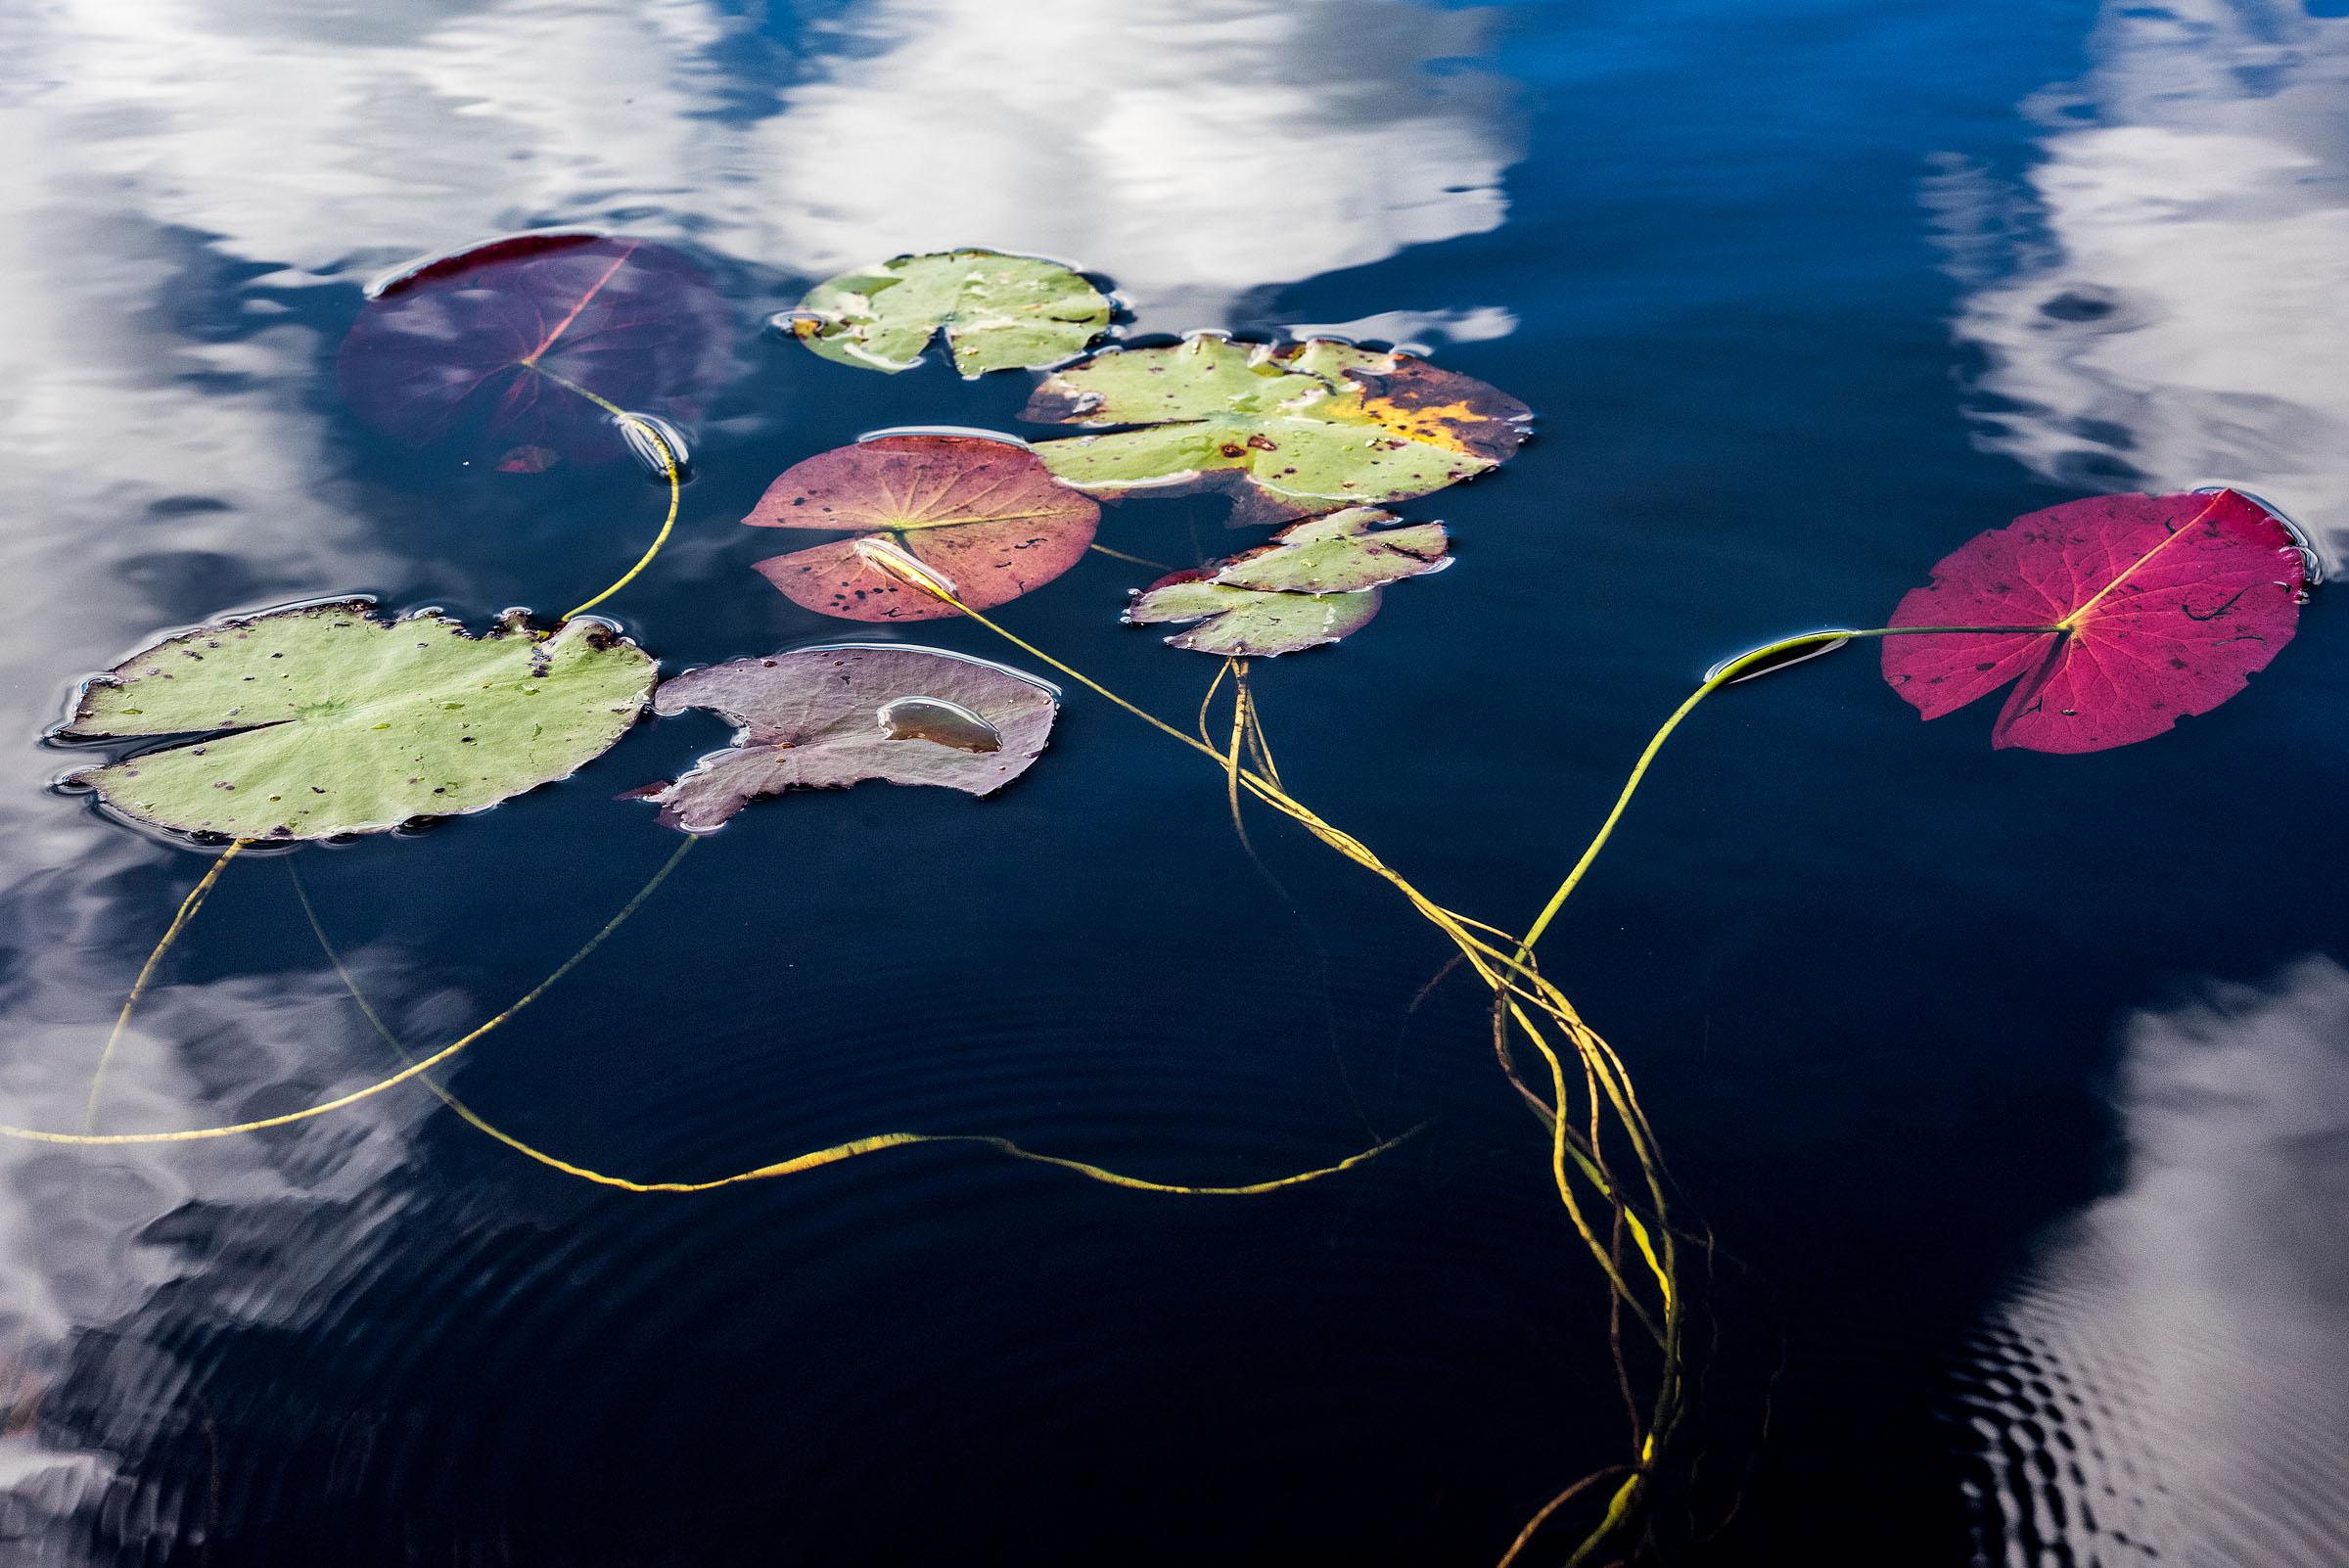 Sage Sohier Abstract Photograph - Lily Pads, Photograph, Abstract Landscape, Reflections on New Hampshire Pond